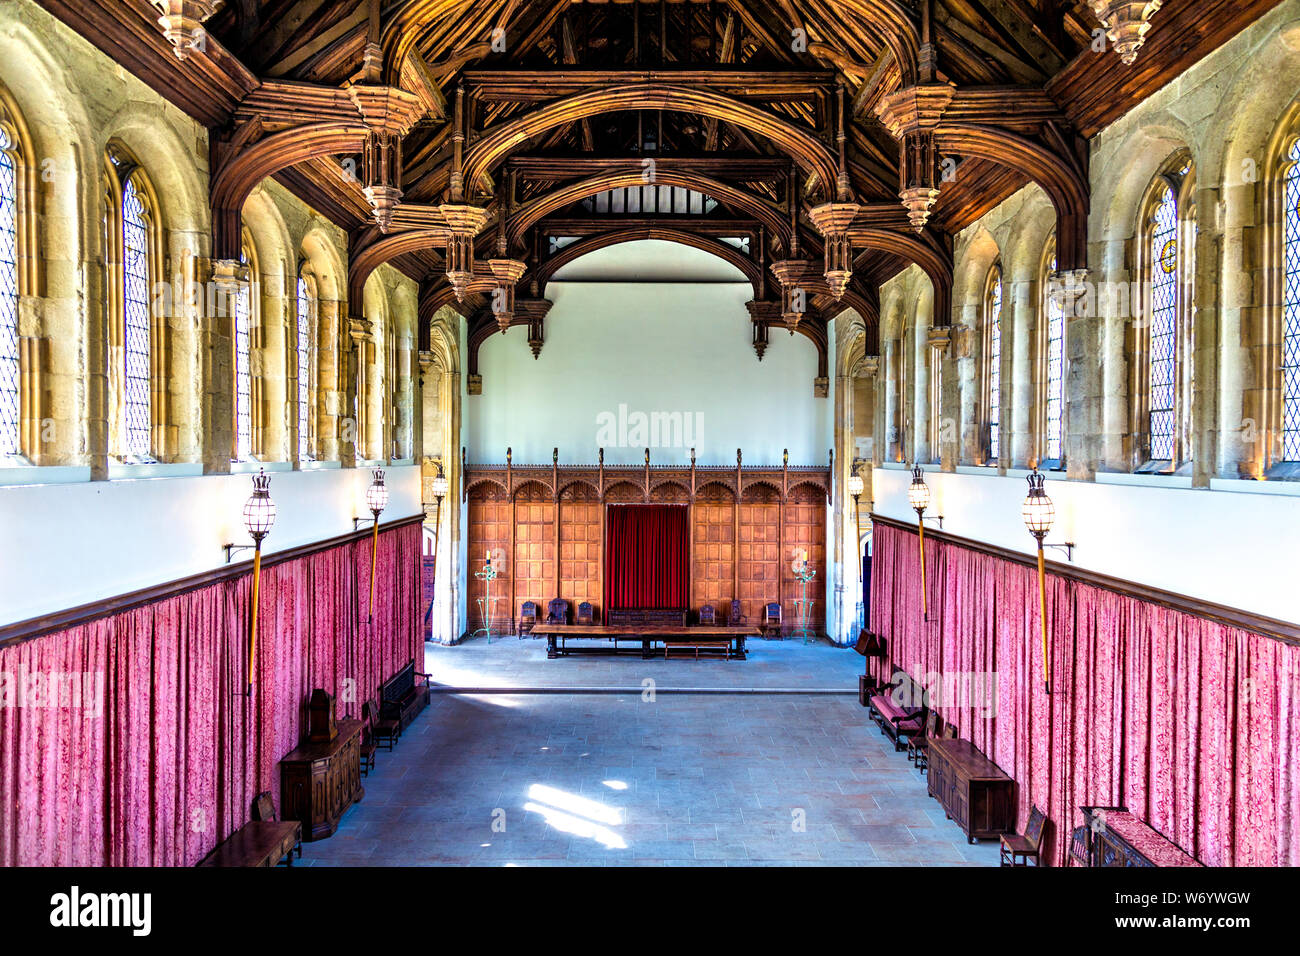 The medieval Great Hall at Eltham Palace, UK Stock Photo